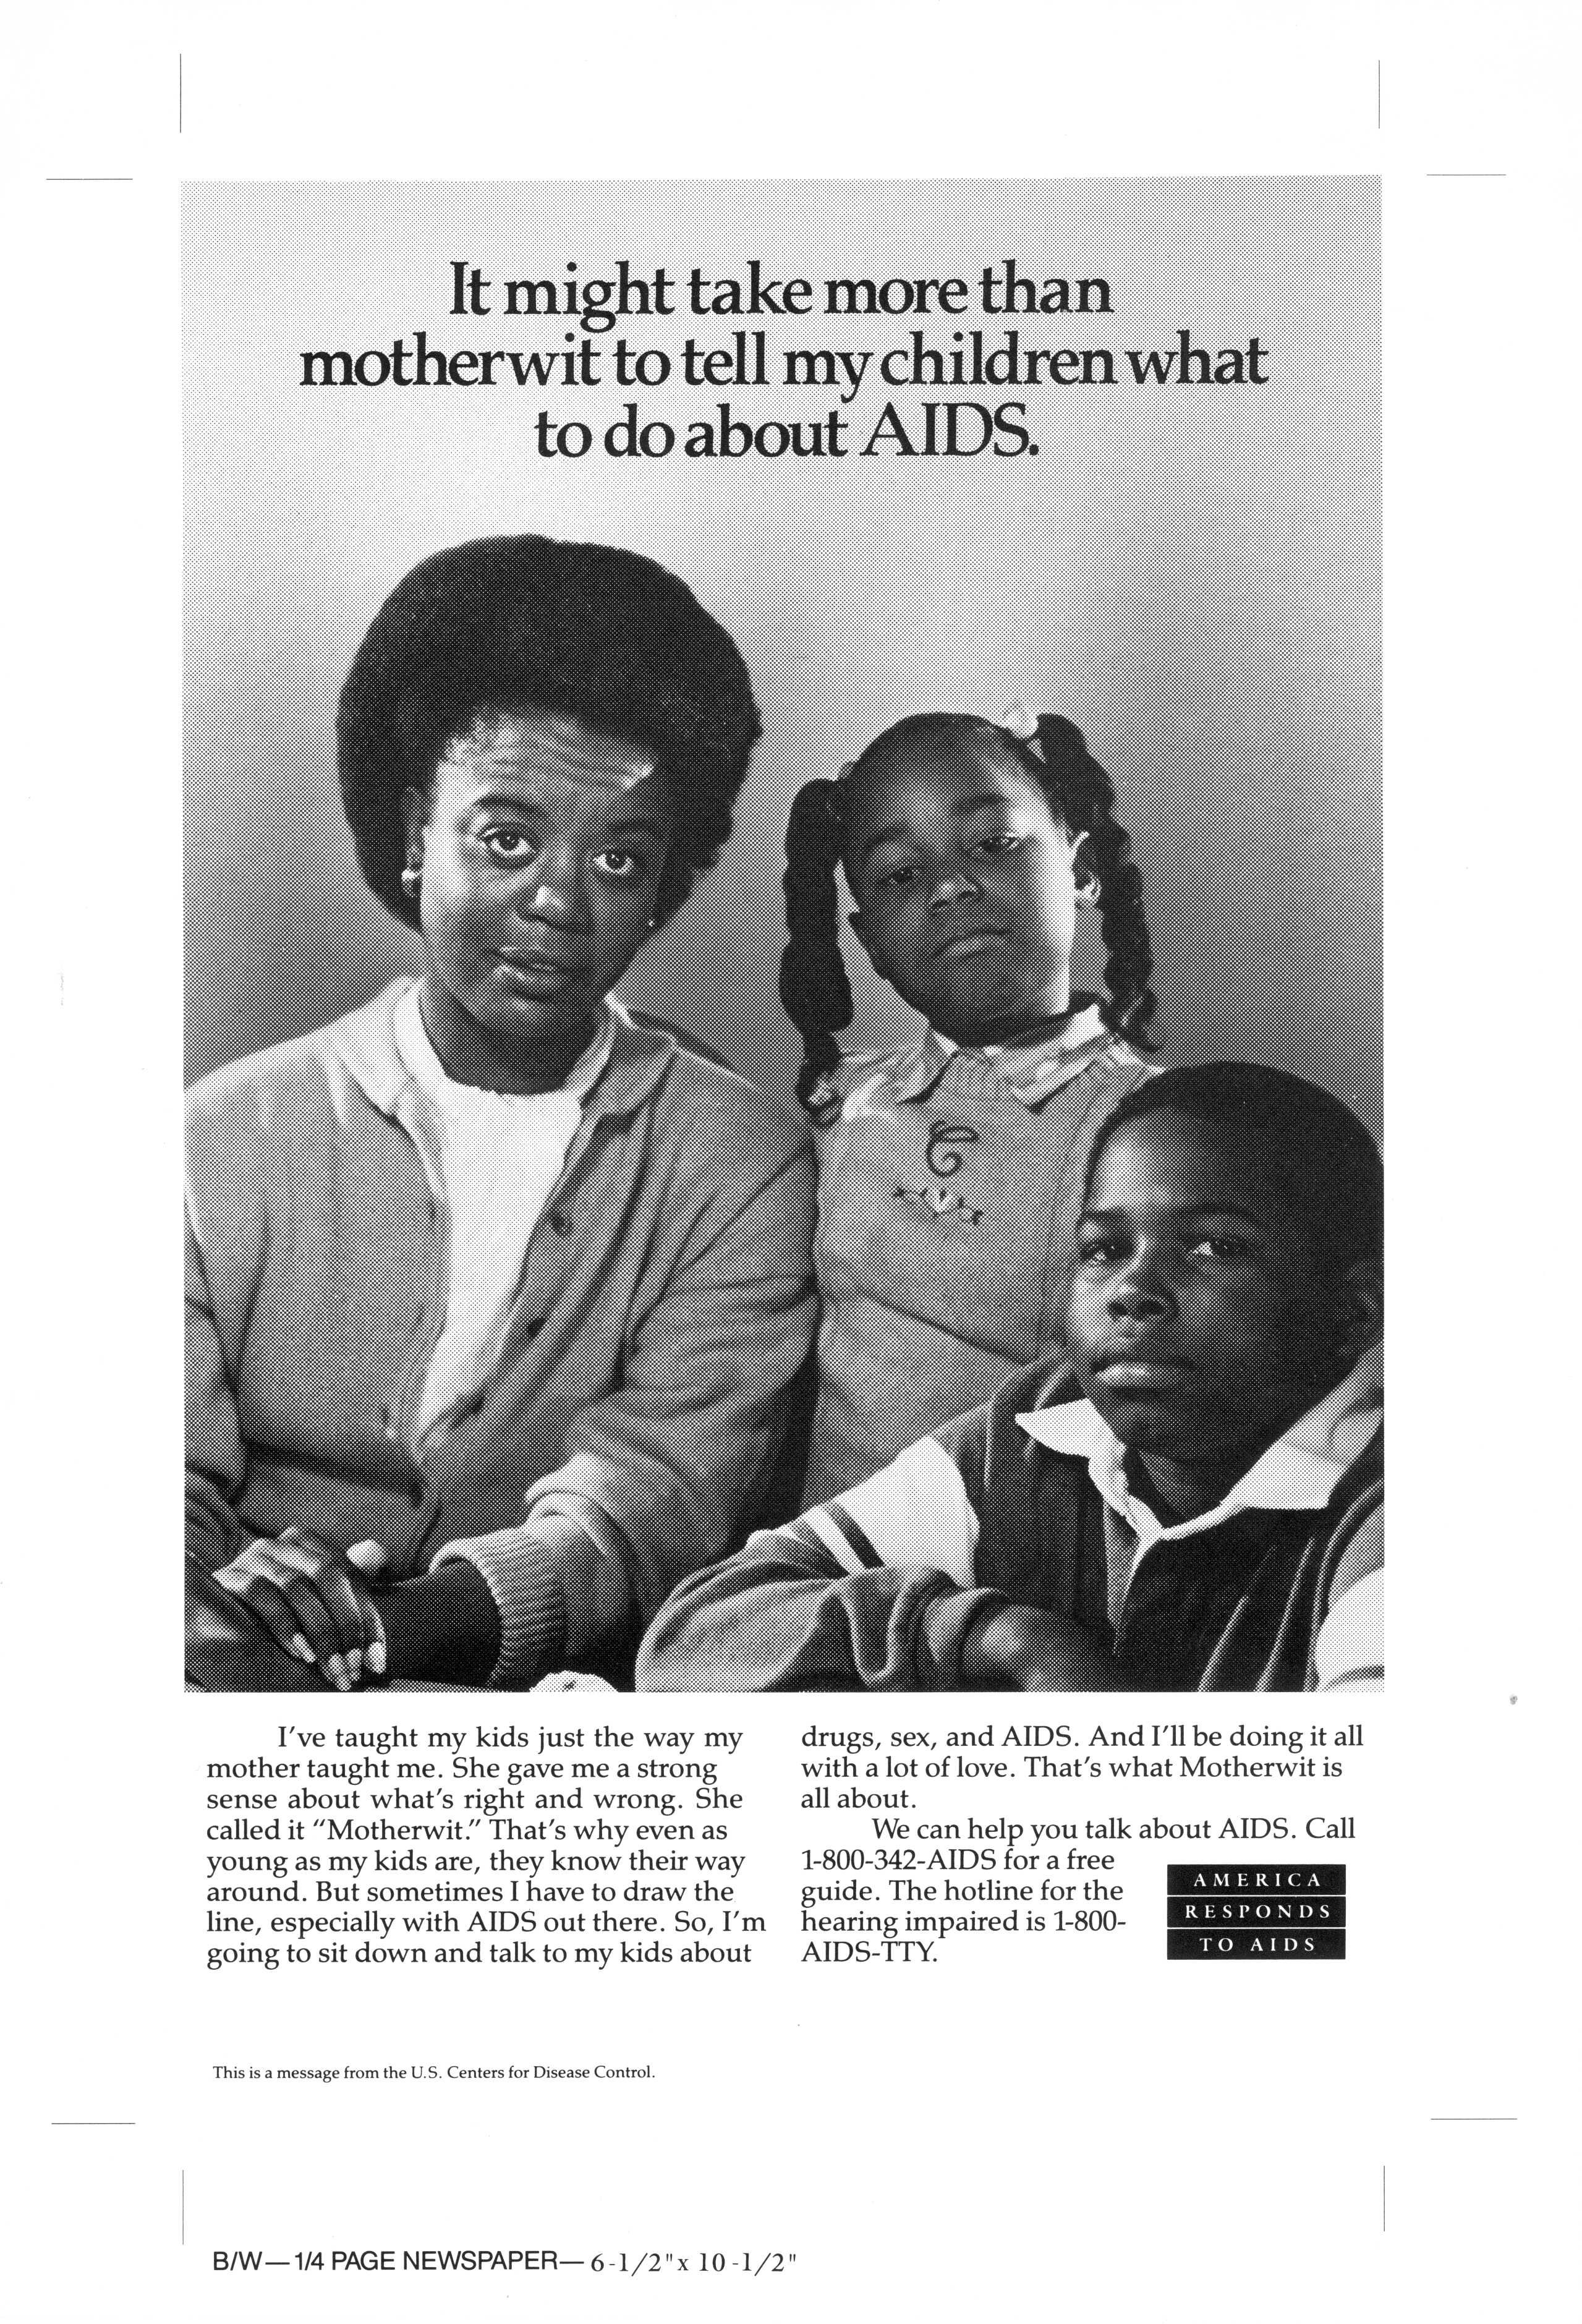 It might take more than motherwit to tell my children what to do about AIDS